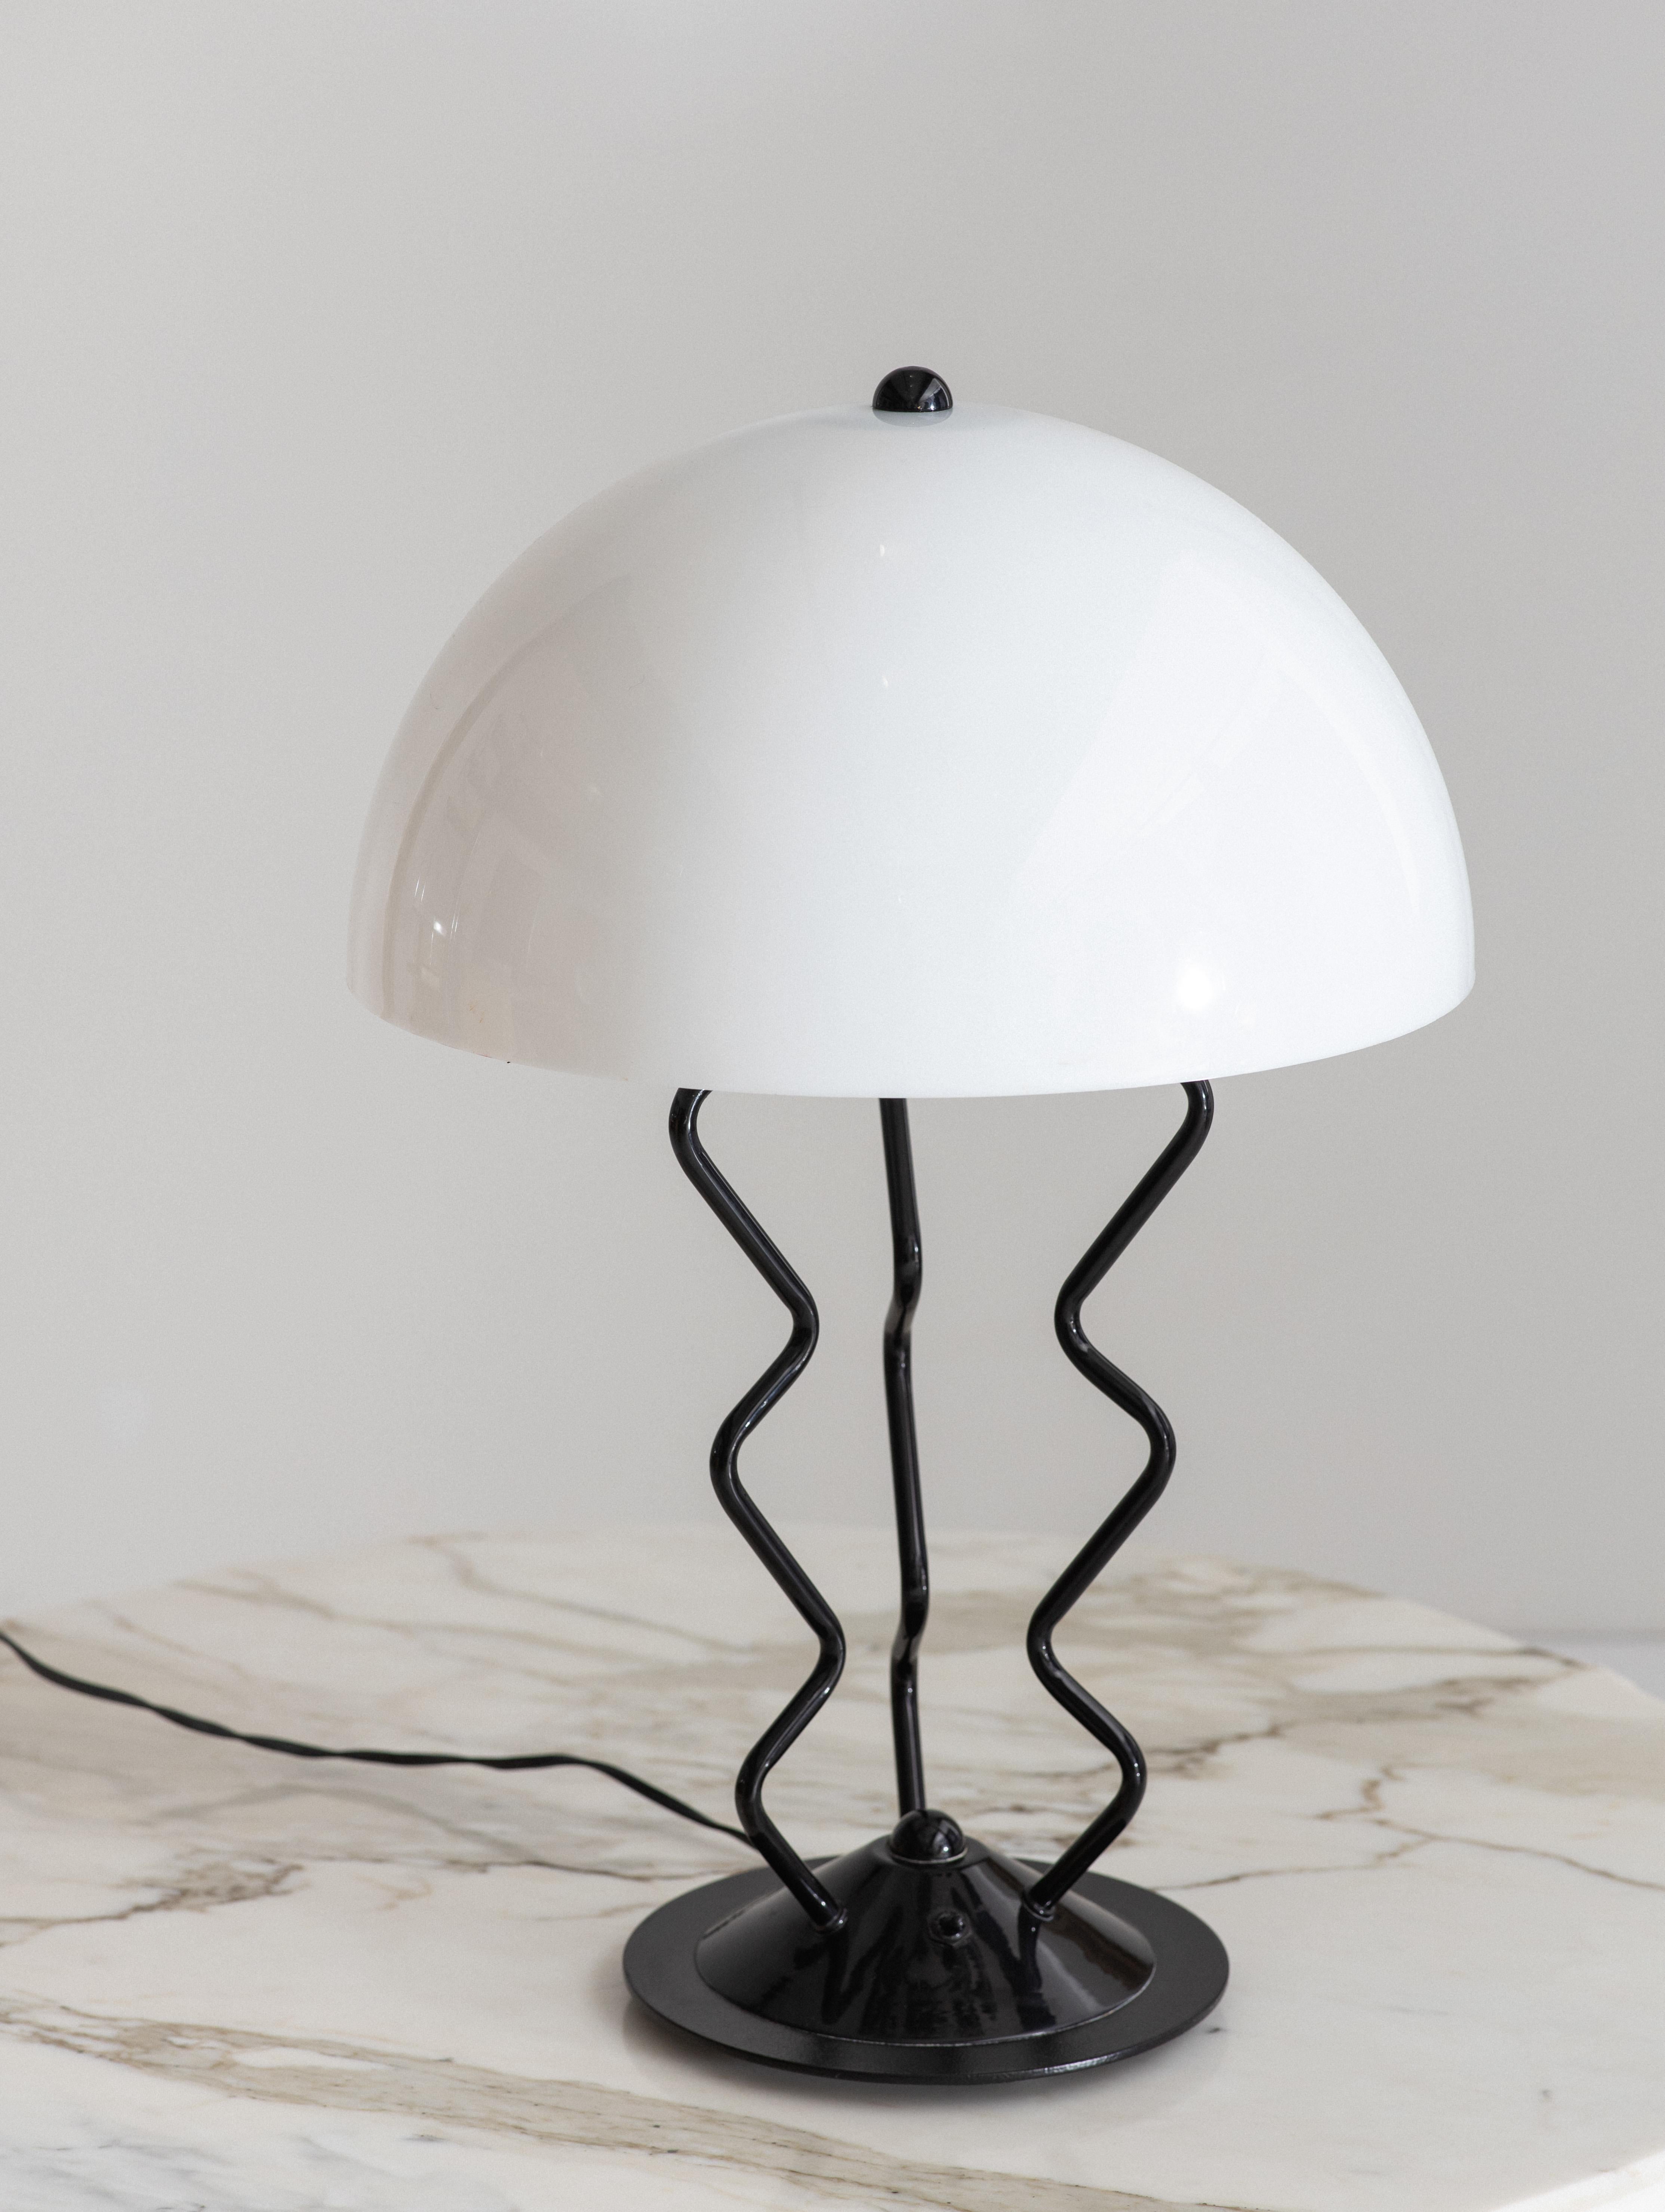 Memphis style gloss black metal table lamp with white acrylic dome shade. Fantastical form suggestive of a jellyfish. On off switch at base.